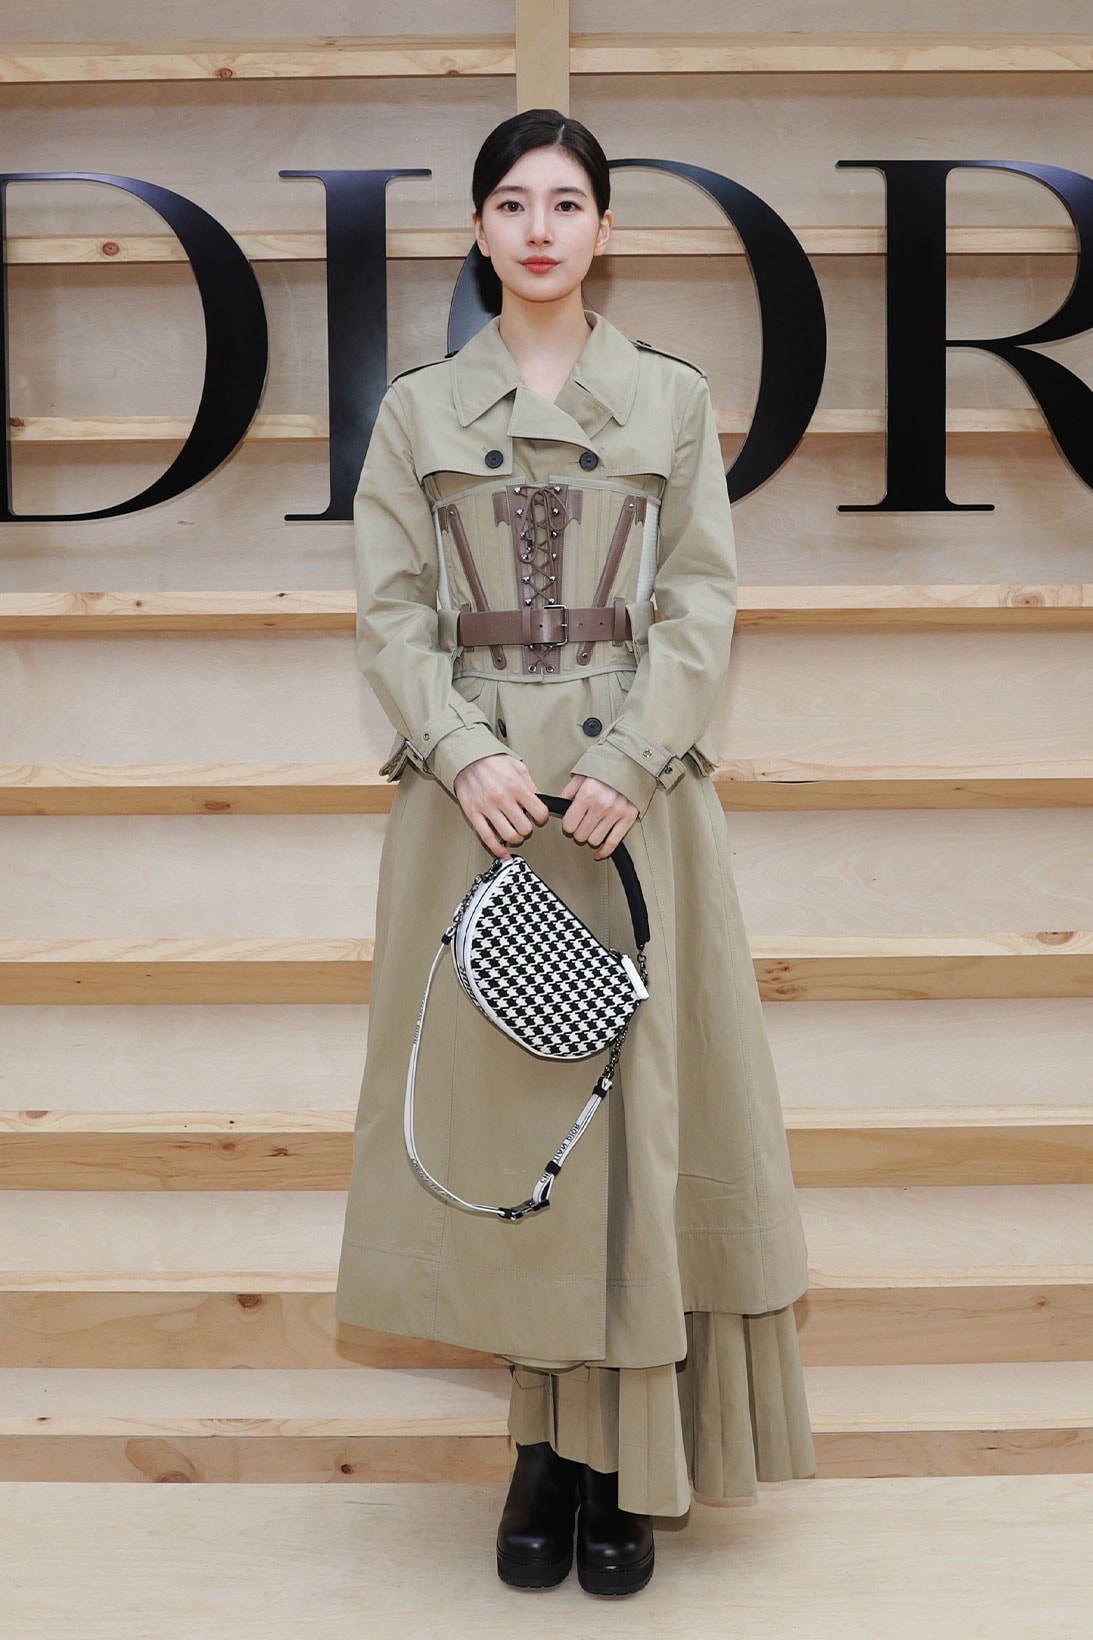 What Is The Lady Dior Bag And Why Do Celebs Love It?